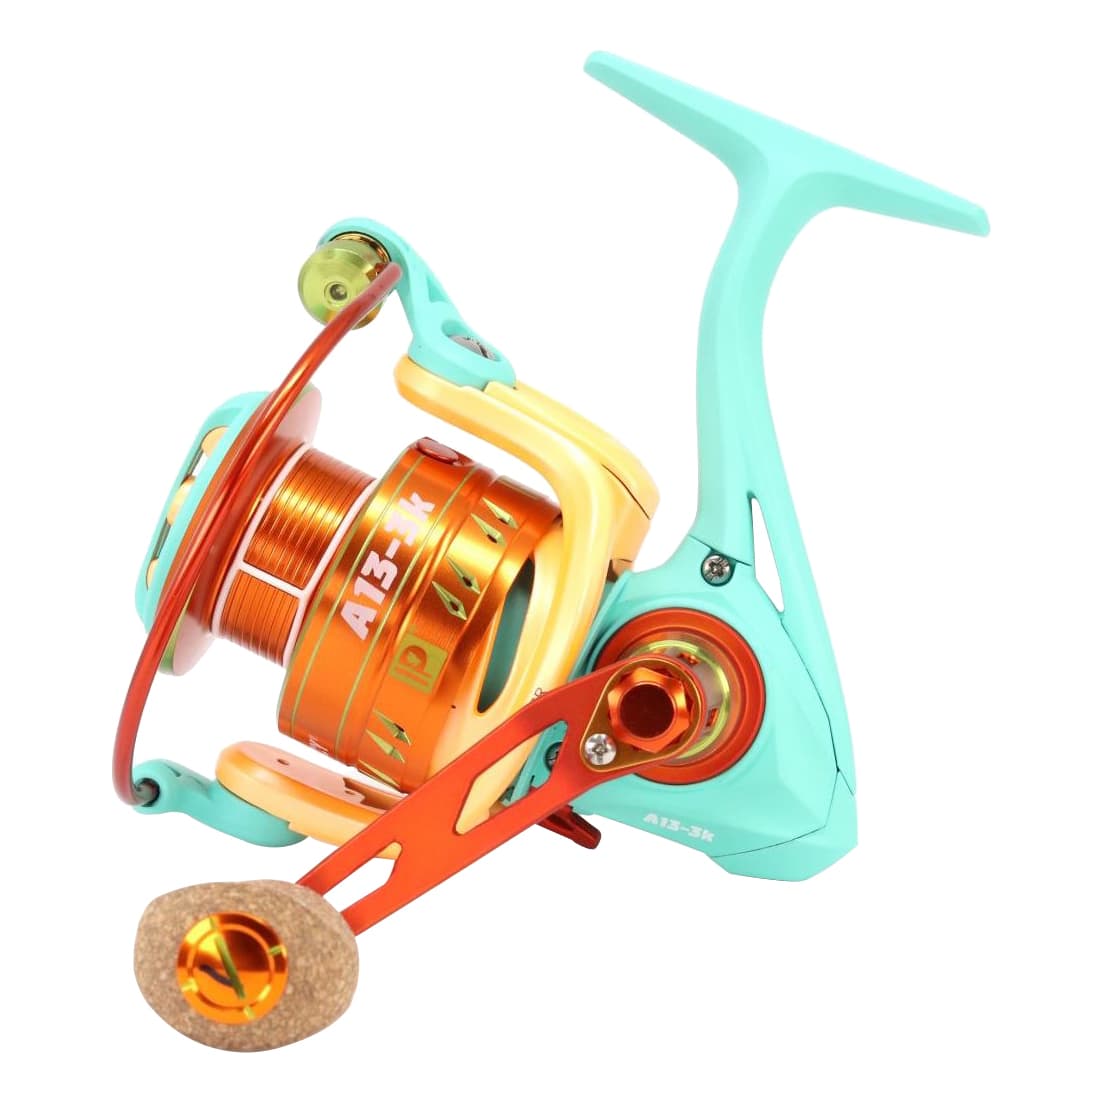 Anything Possible A13-2Kkrzy: A13 2000 Series Krazy Spinning Reel